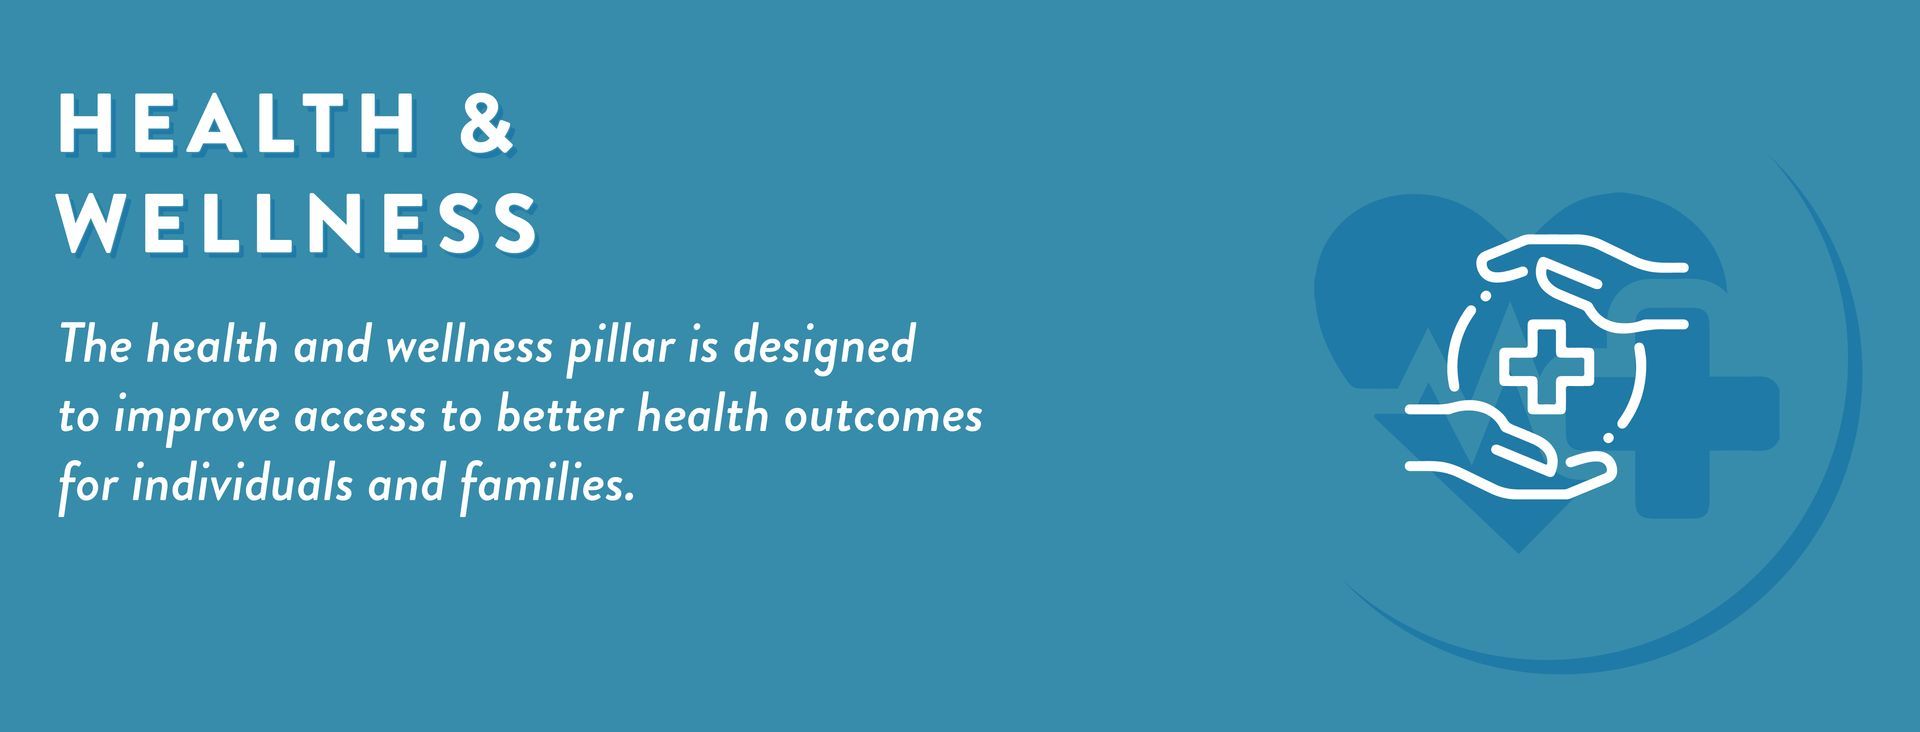 The health and wellness pillar is designed  to improve access to better health outcomes for individuals and families.